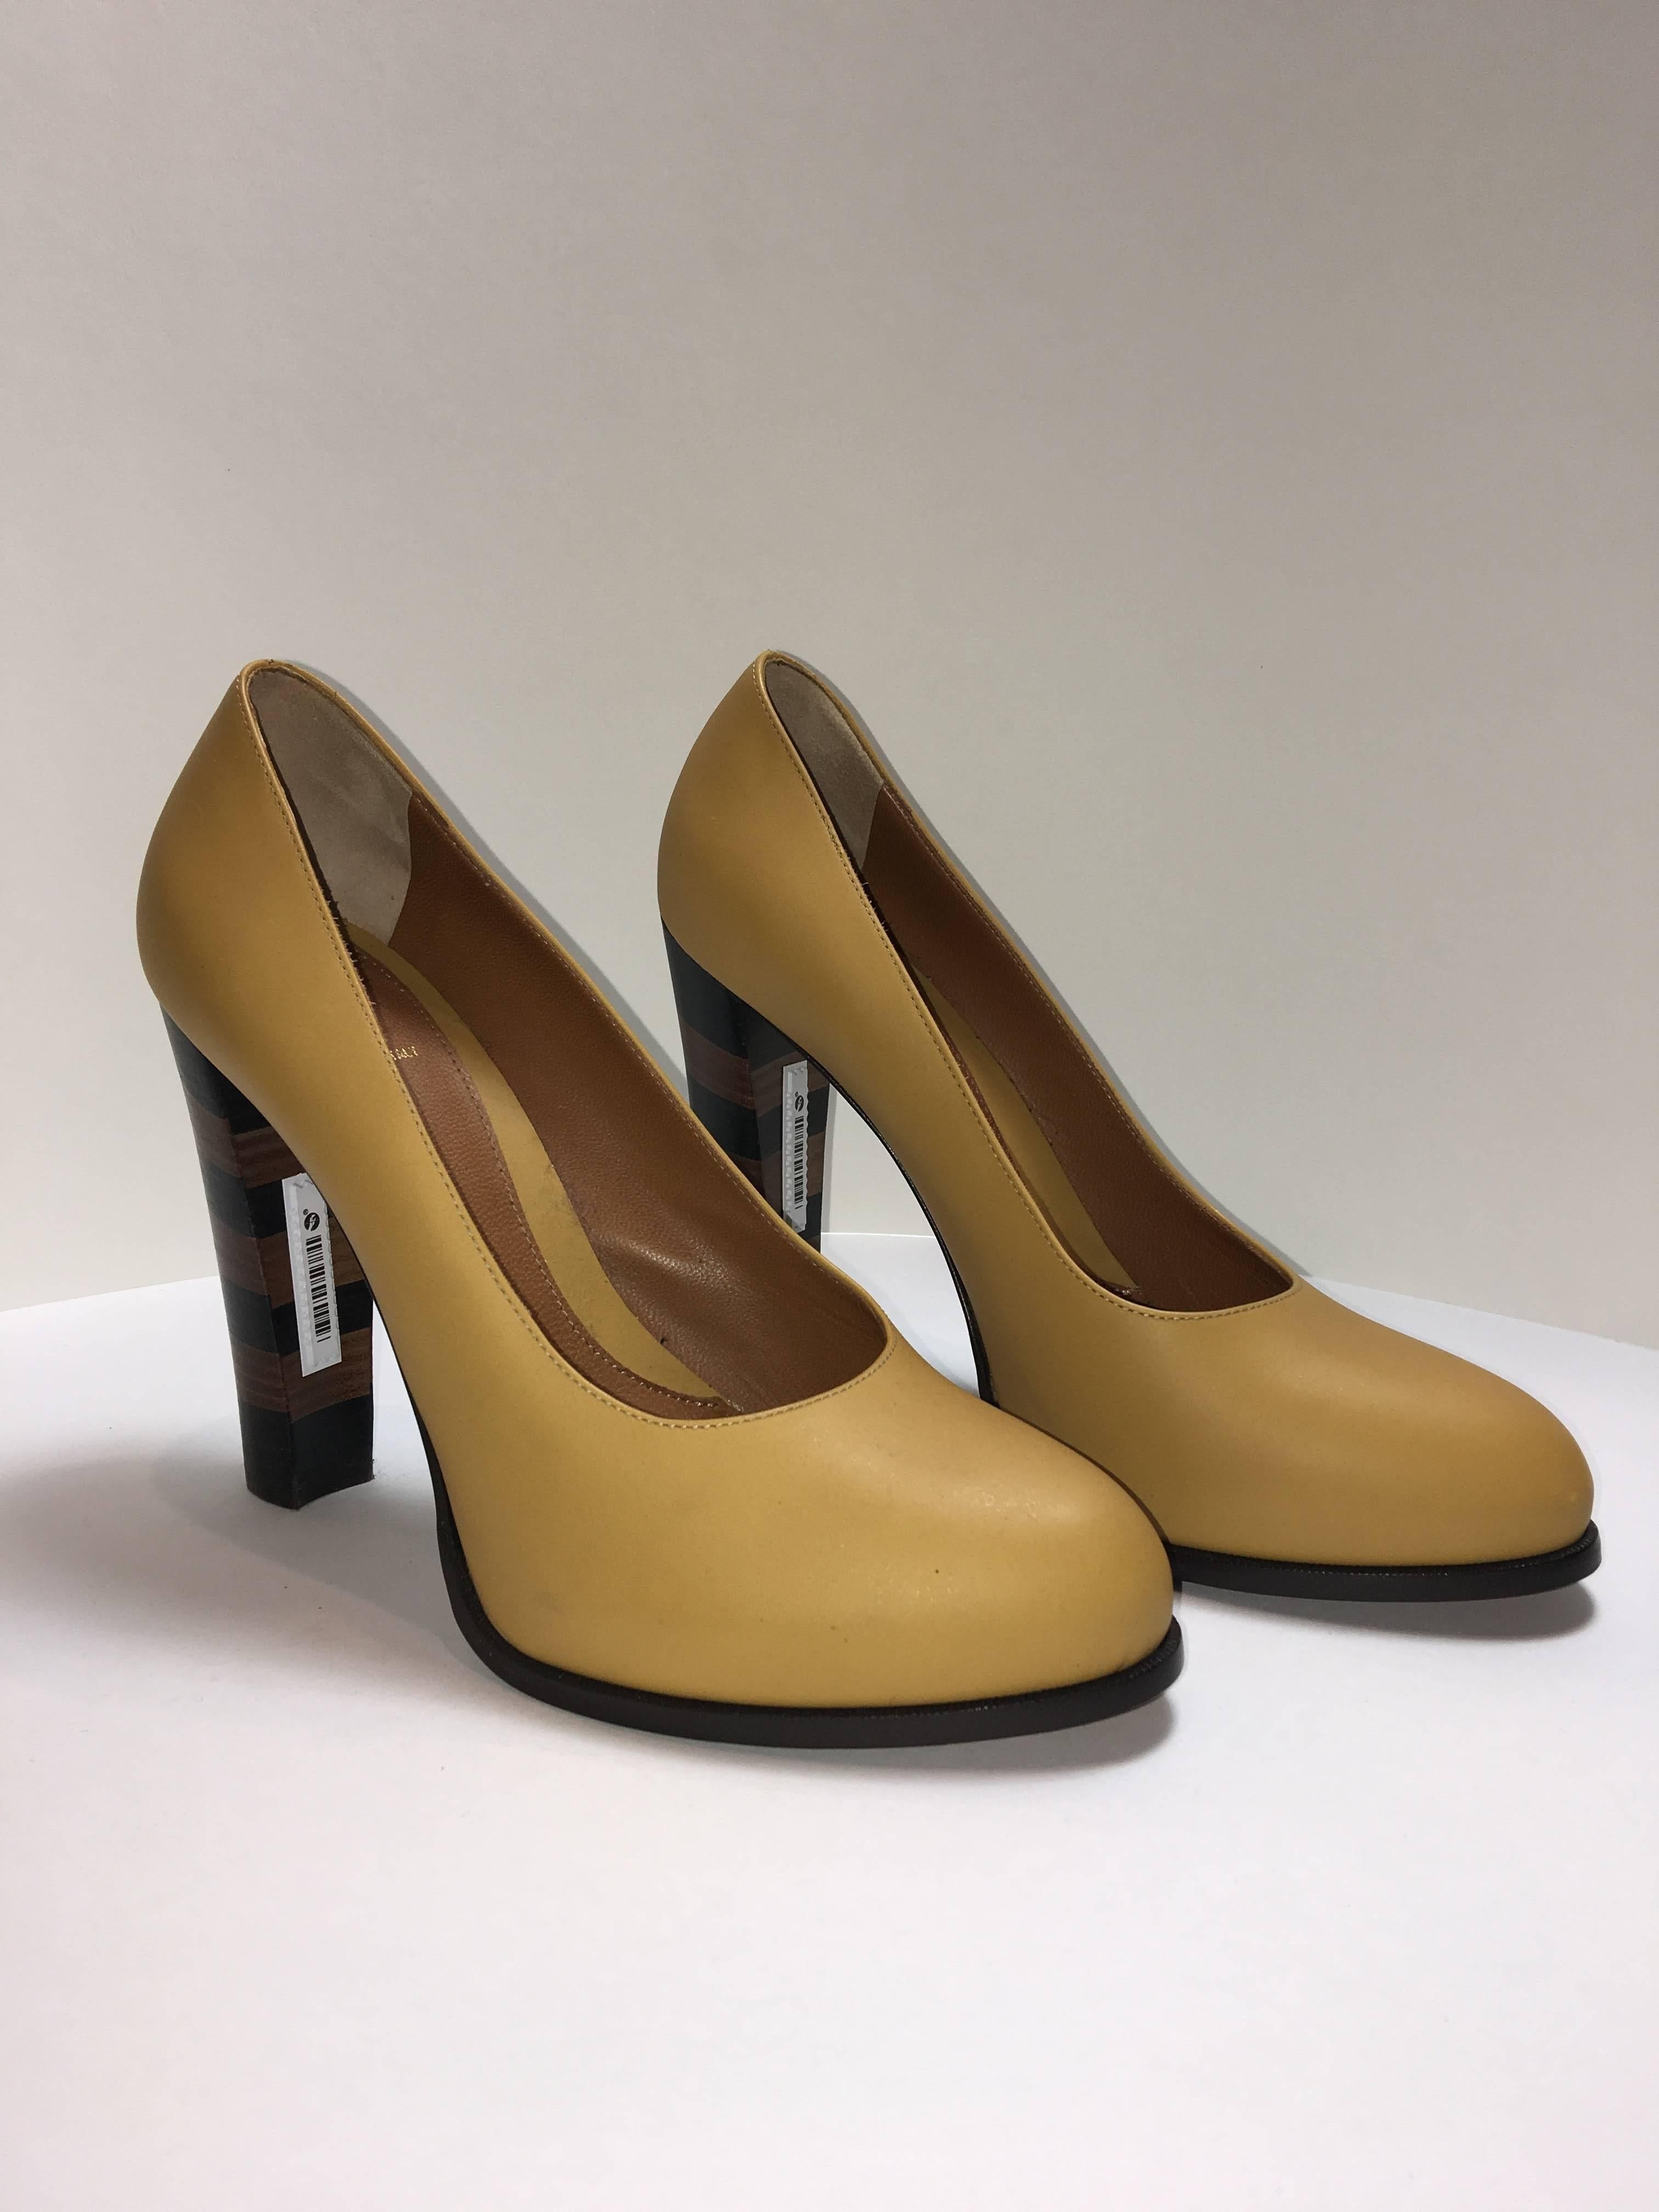 Fendi round toe pumps. Striped blocked heel with alternating brown and dark brown color blocking. Very light wear. 